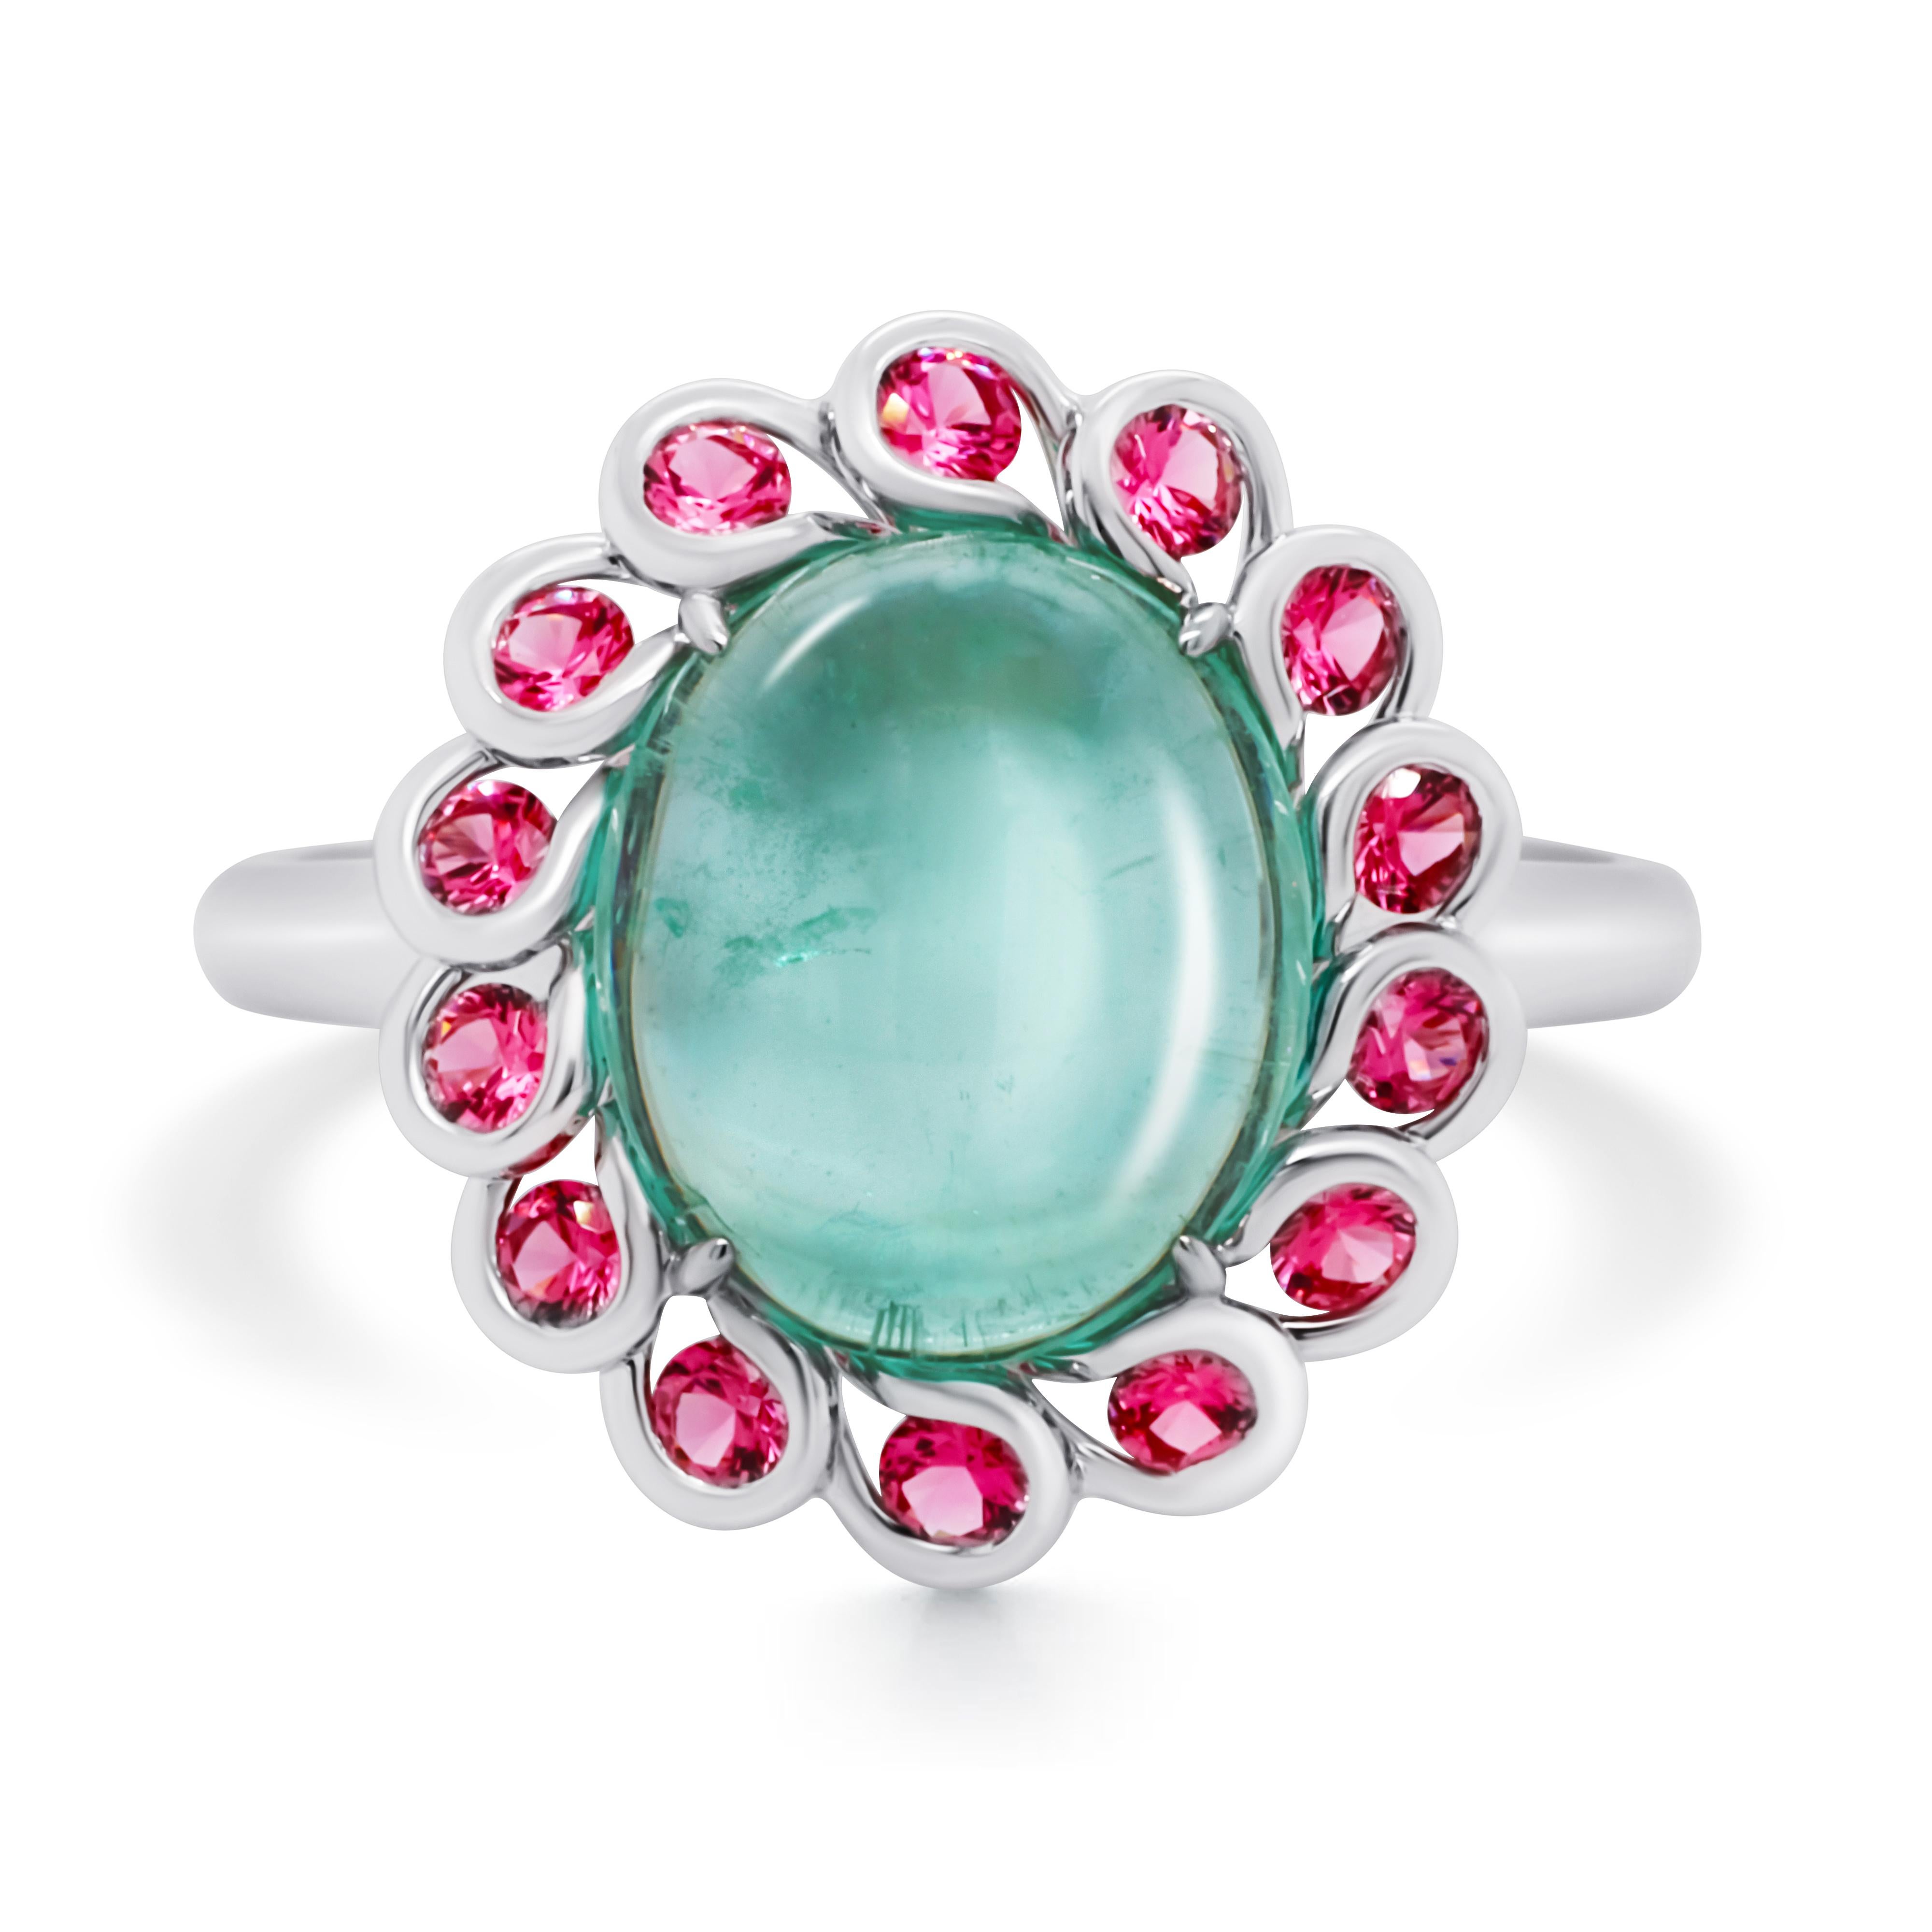 A playful Ring centered with mint green Emerald cabochon and accented by romantic pink Spinel. 
The Emerald comes from the picturesque Ural Mountains in Russia and has a very pleasant green color. The Spinels set around the Emerald are nice pink